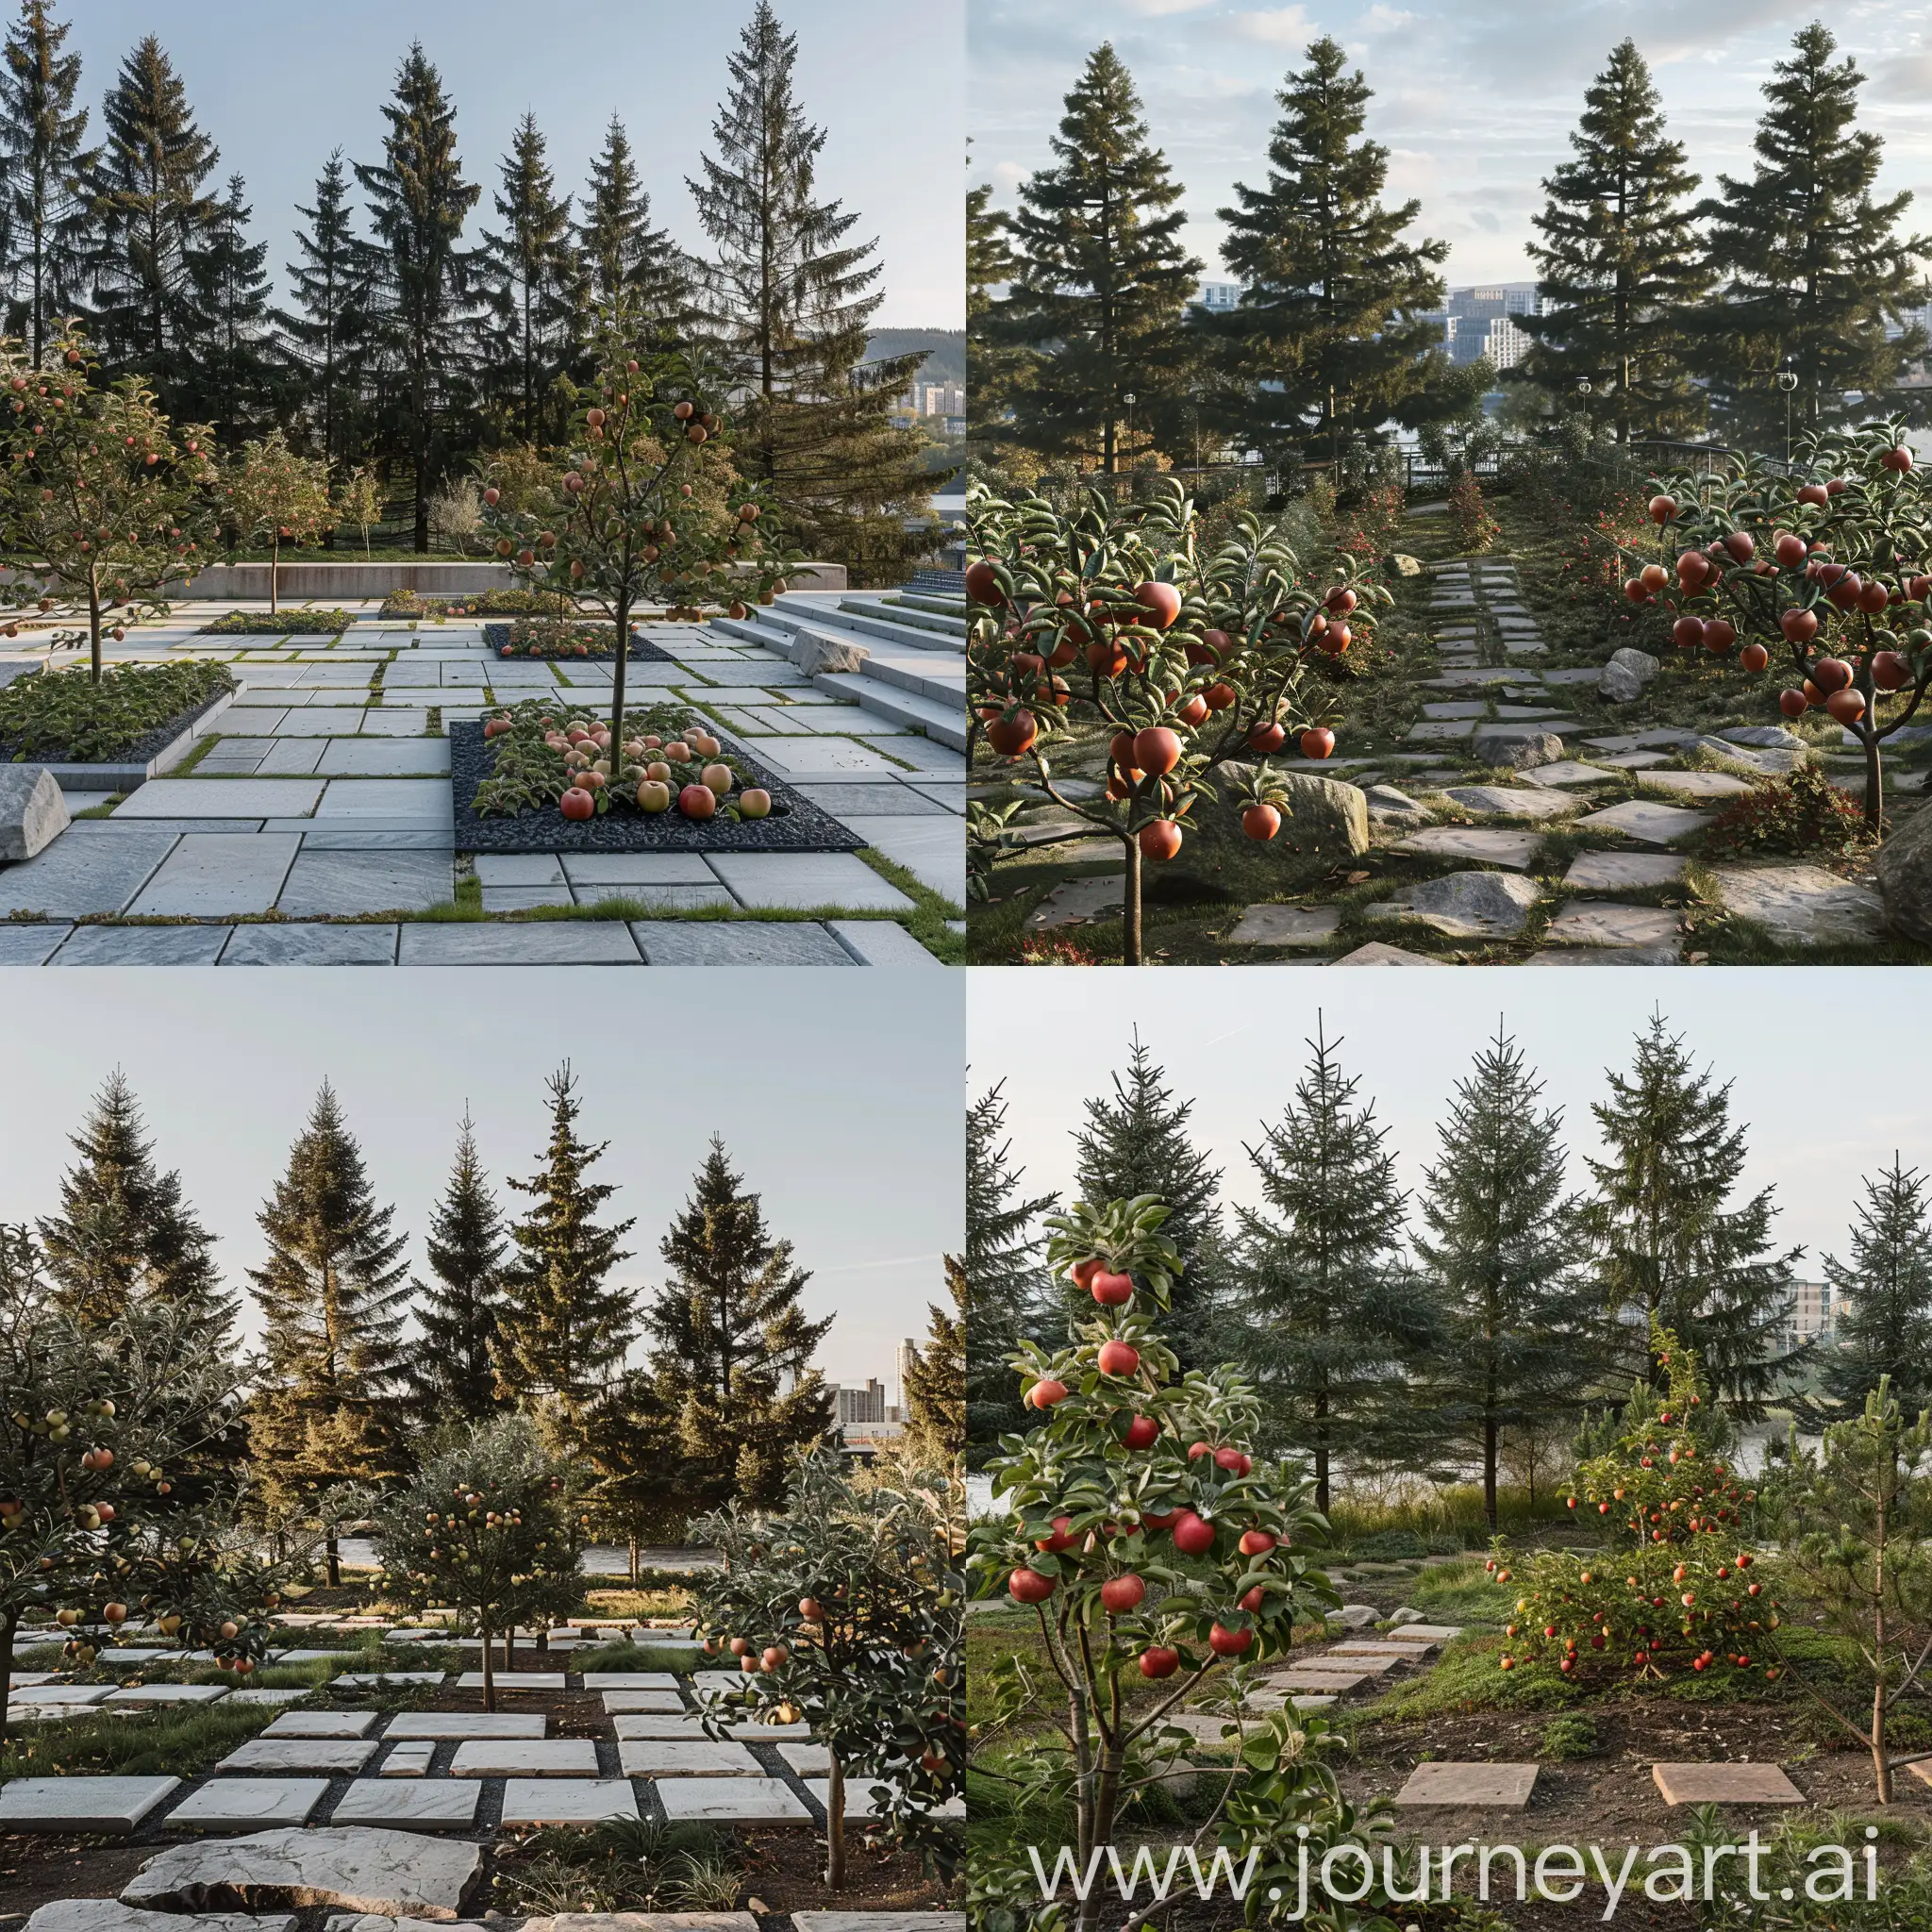 apple orchard in the context of Glasgow architecture with views of the river clyde. Pine trees in the background, public space, stone paths